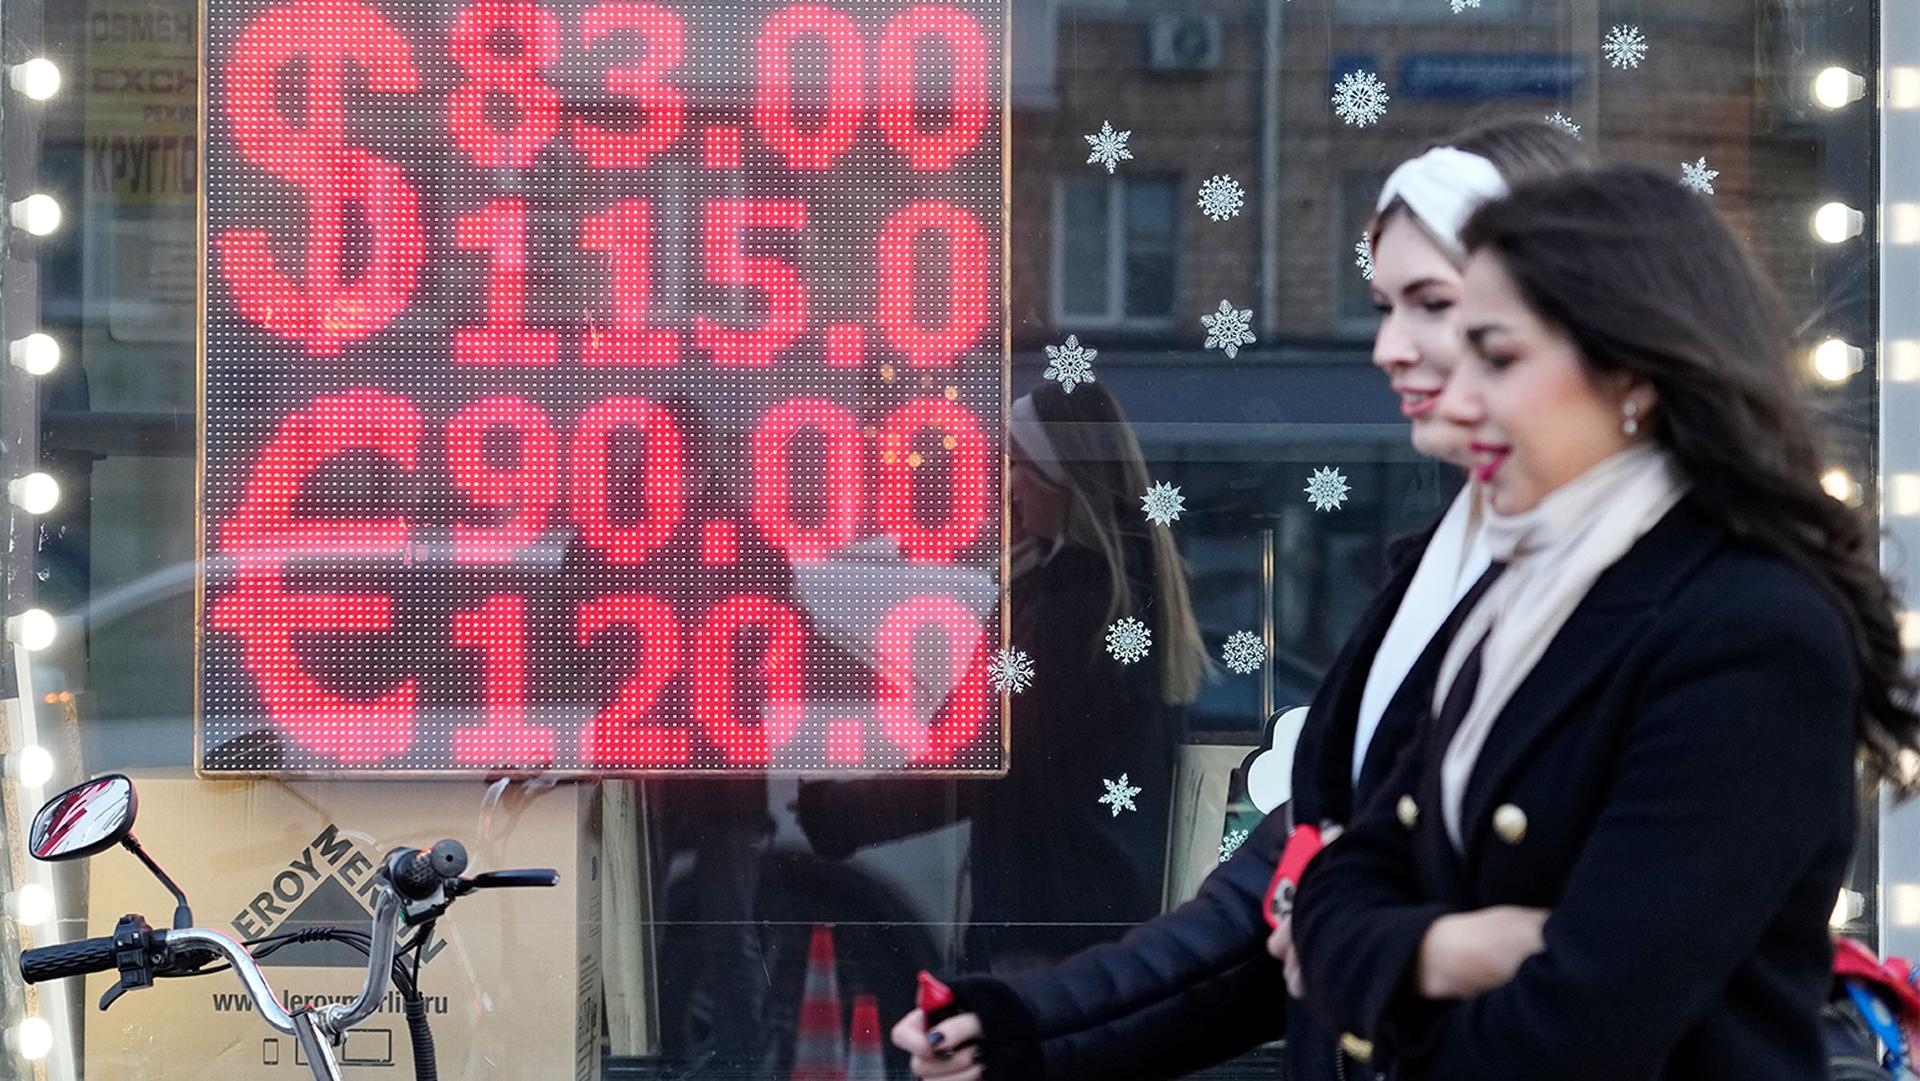 People walk past a currency exchange office screen displaying the exchange rates of U.S. Dollar and Euro to Russian Rubles in Moscow's downtown, Russia